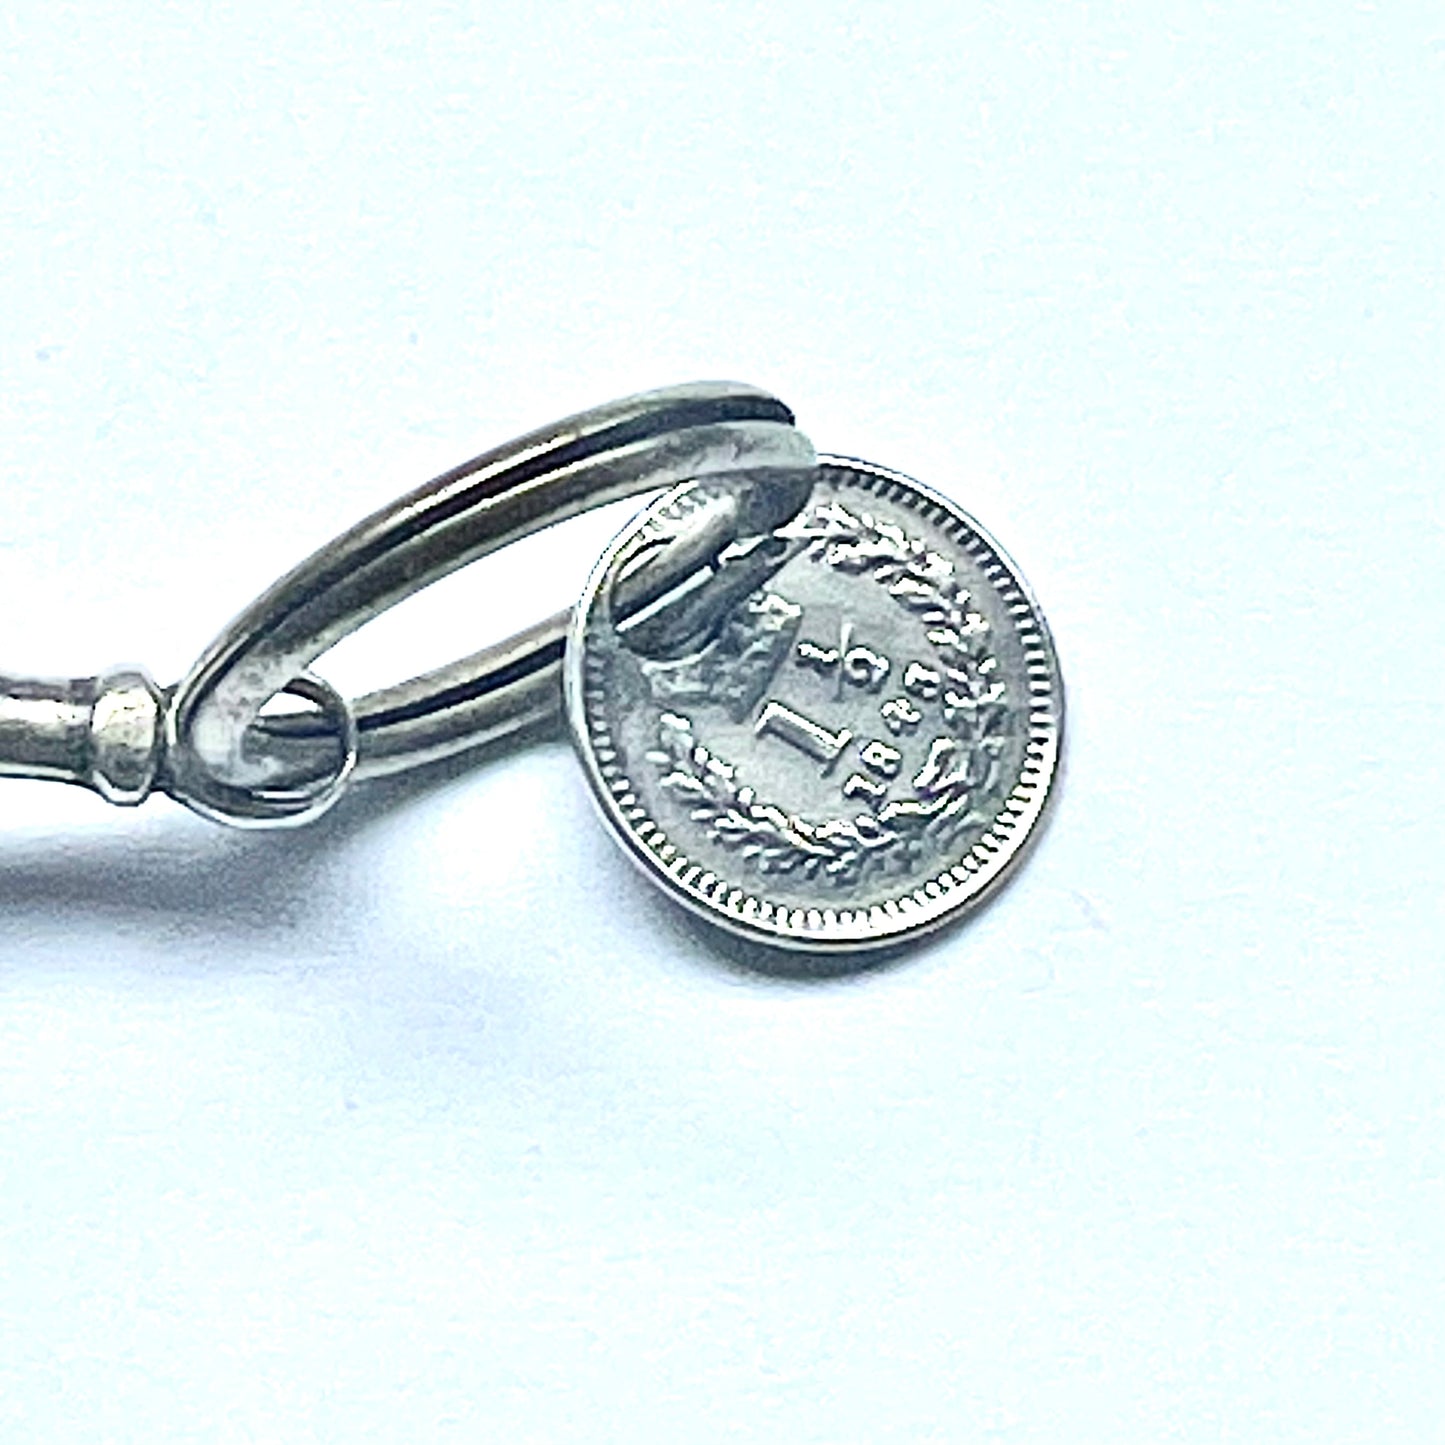 Antique English sterling silver seal fob circa first half of 19th century with sterling silver 1845 penny charm